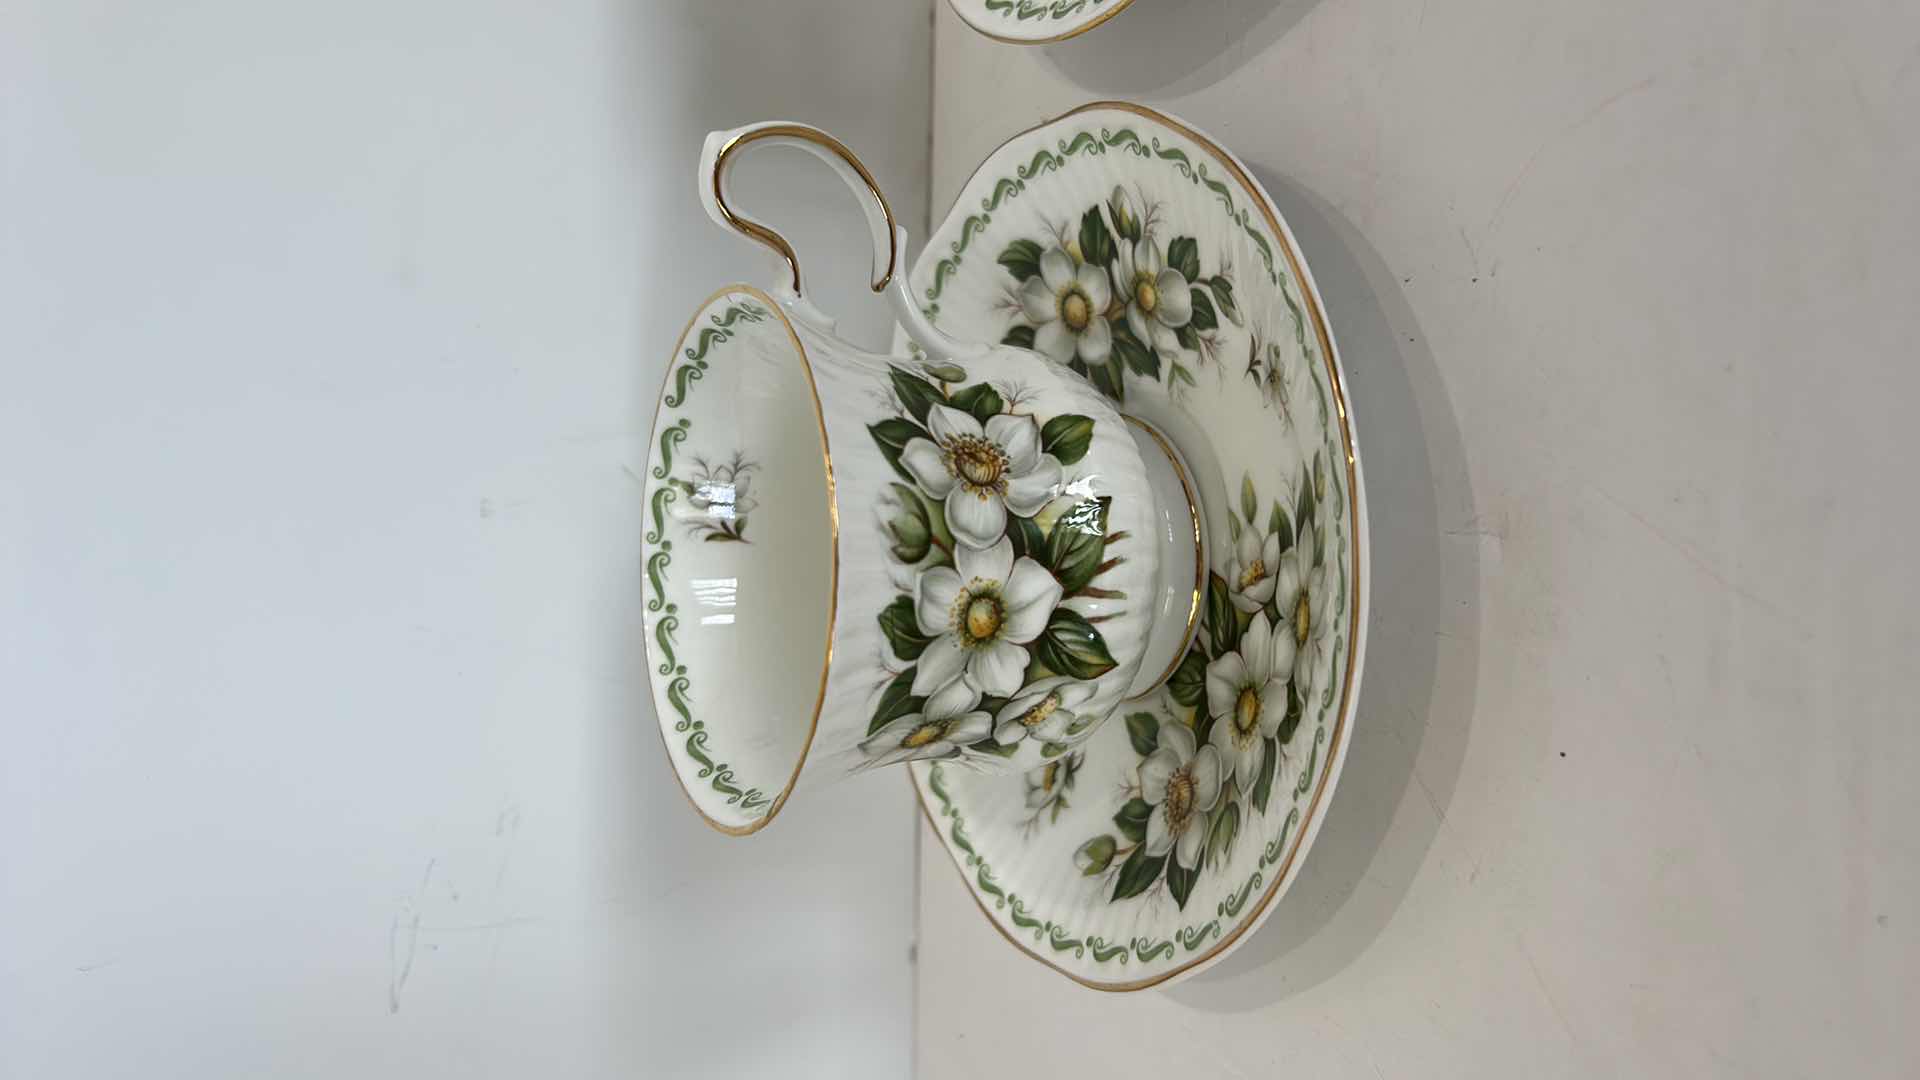 Photo 2 of 2 COLLECTIBE PORCELAIN TEACUPS AND SAUCERS, FINE BONE CHINA  FROM ENGLAND CHRISTMAS ROSE AND SWEET PEA